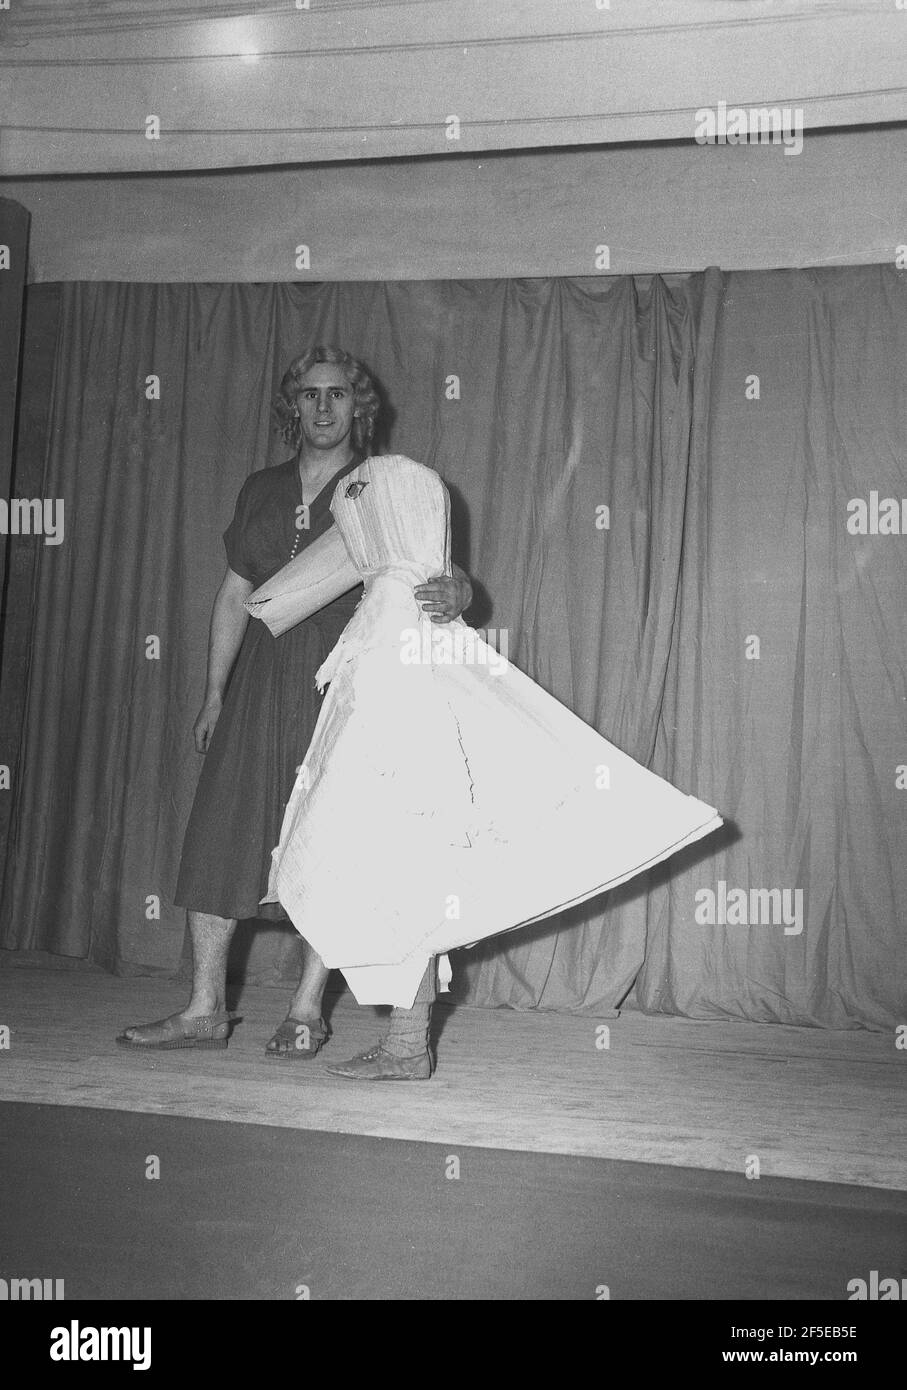 1954, historical, on a stage infront of the curtain wearing costumes, a  tall male actor in a woman's dress and wig and the 'mother goose', performing in the pantomime, 'Mother Goose', England, UK. Originally the imaginary author of a collection of French fairy tales and later of English nursery rhymes, it is said that the character first appeared in 1806 as the performance, 'Harlequin and Mother Goose or The Golden Egg'. Different pantomime adaptions of the Mother Goose story continued throughout the 19th and 20th centuries and it has remained a popular family entertainment show. Stock Photo